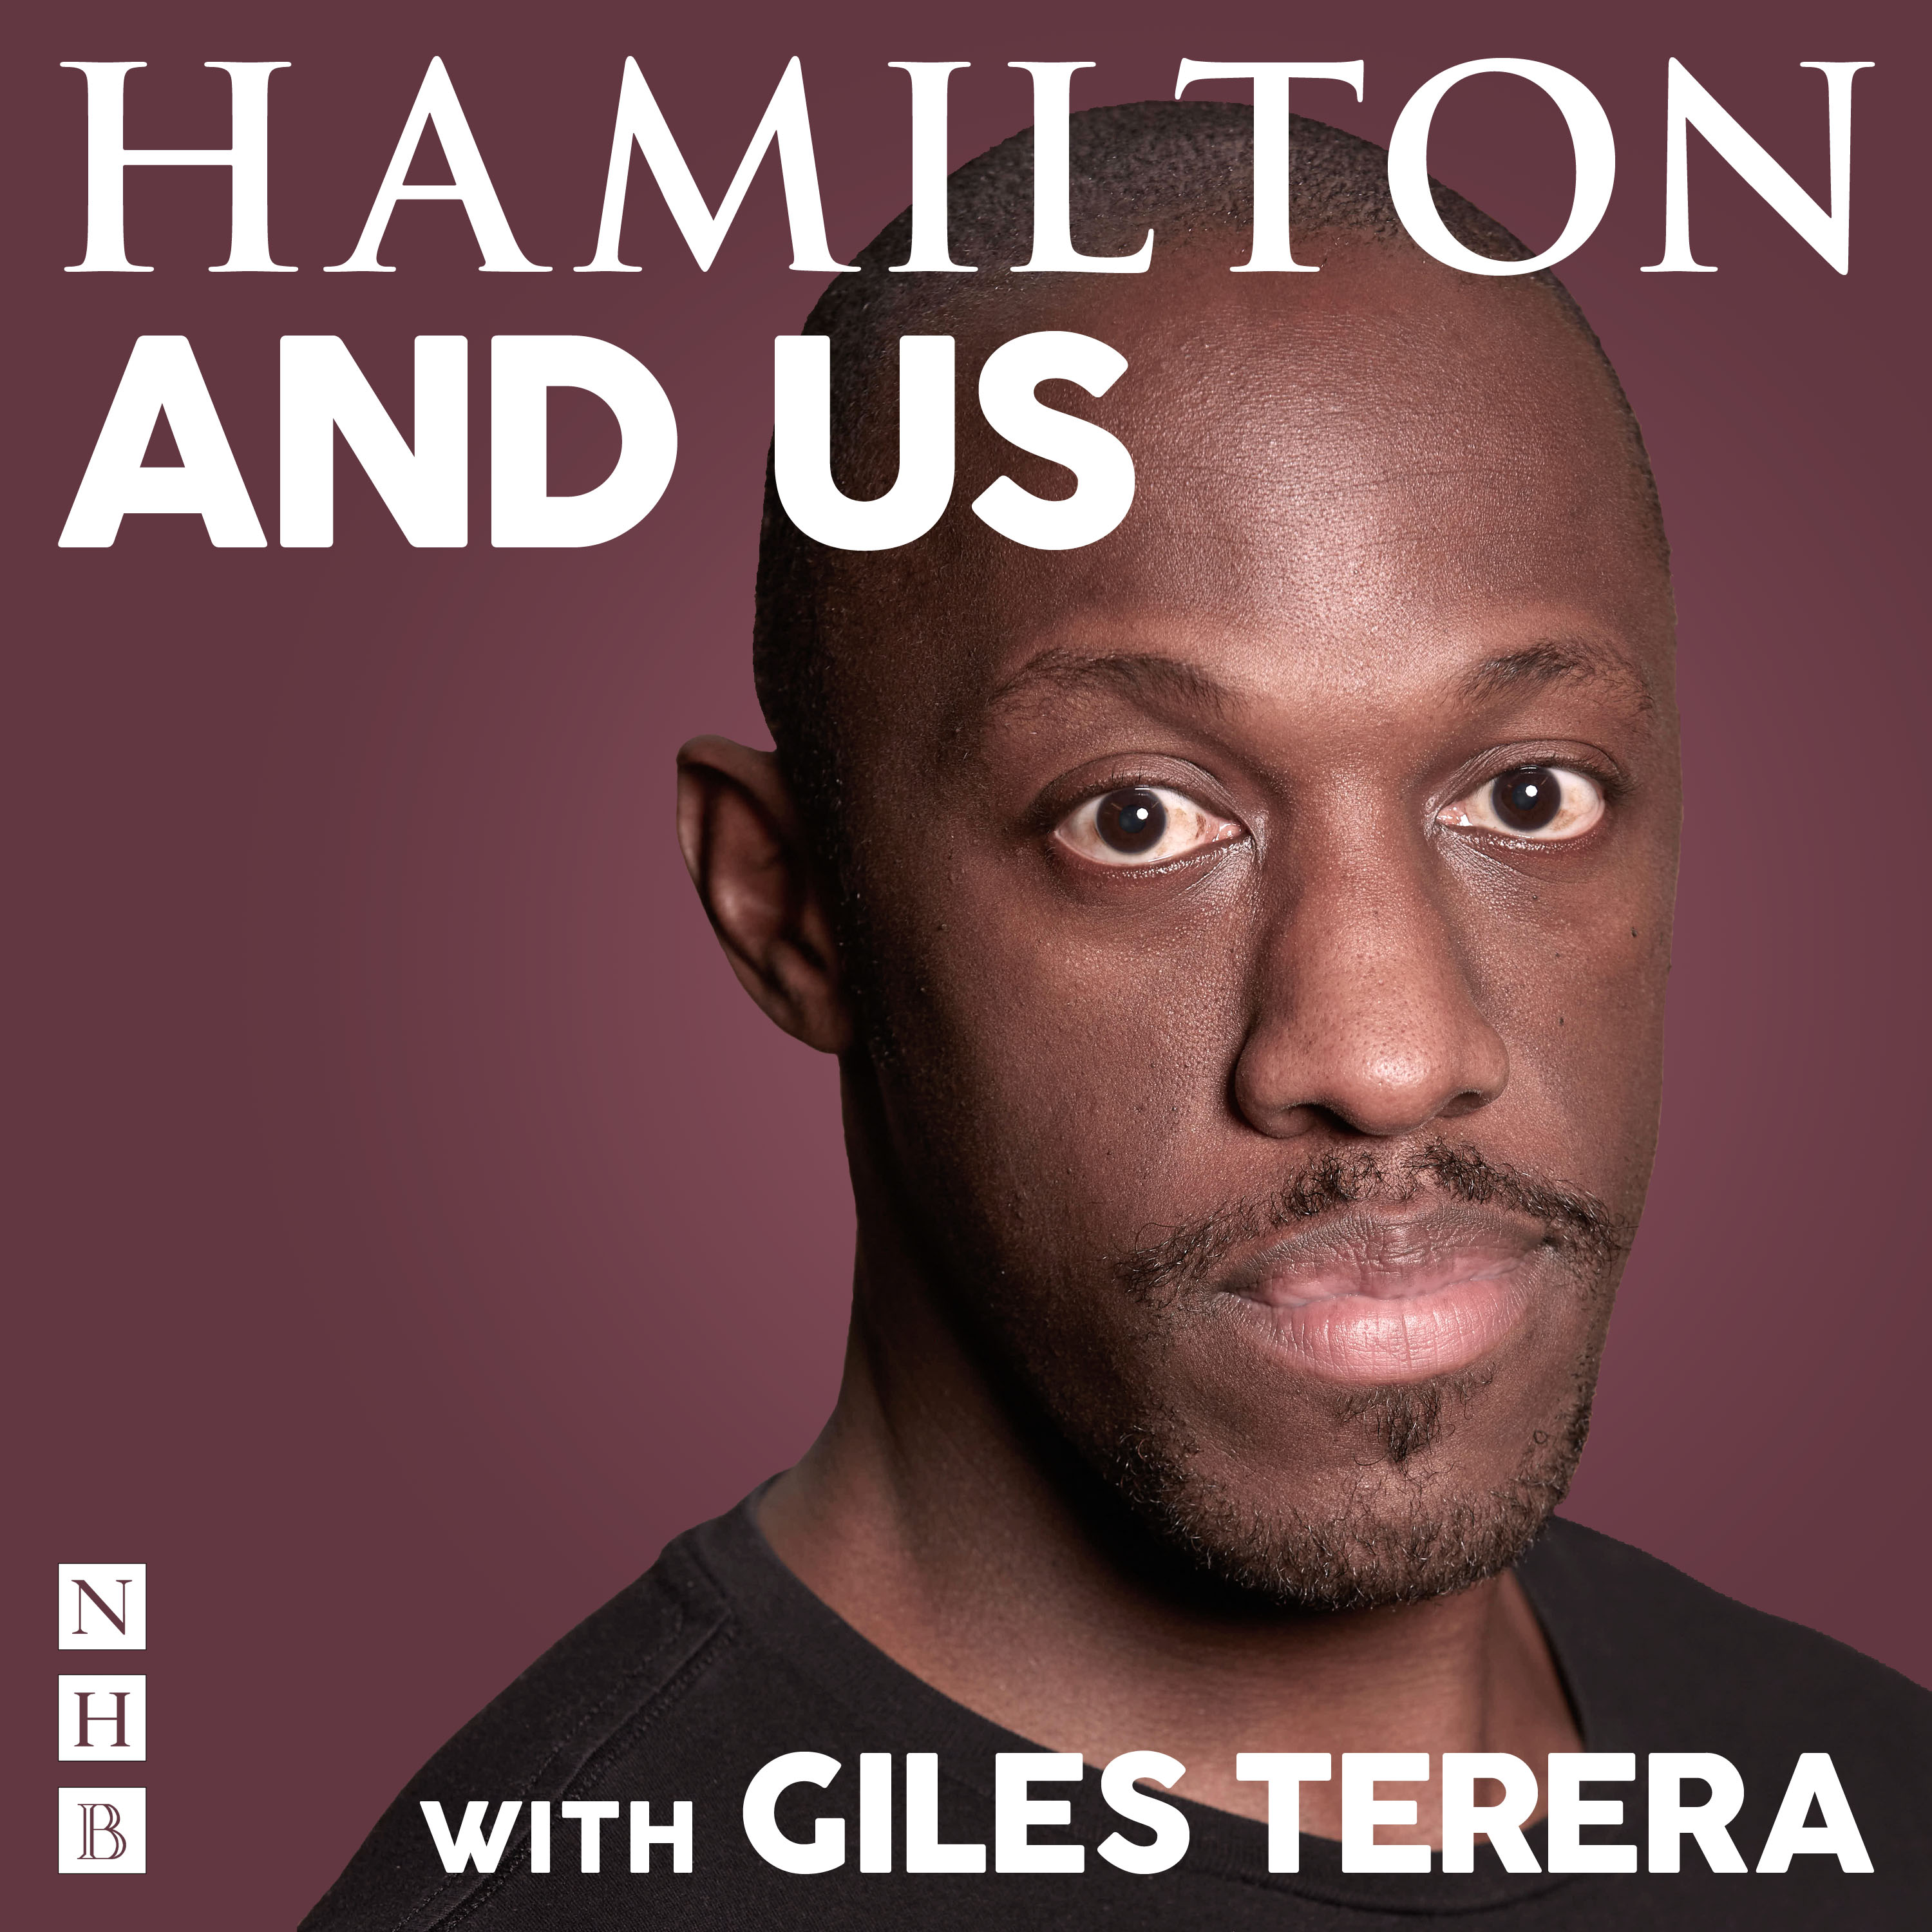 Giles Terera hosts new <em>Hamilton and Me</em> tie-in podcast series